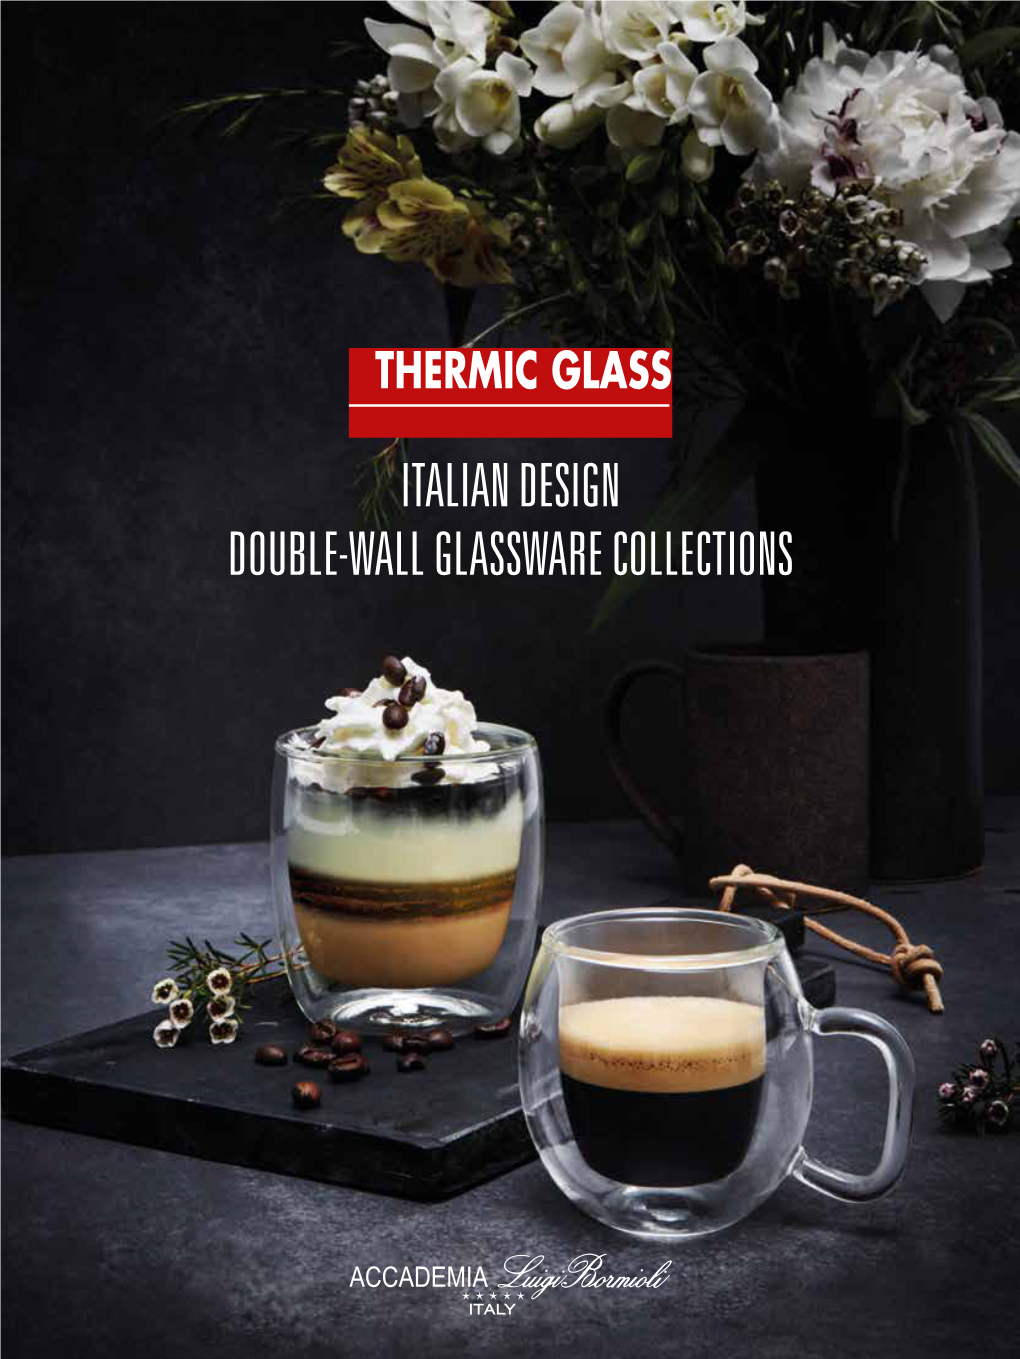 Italian Design Double-Wall Glassware Collections